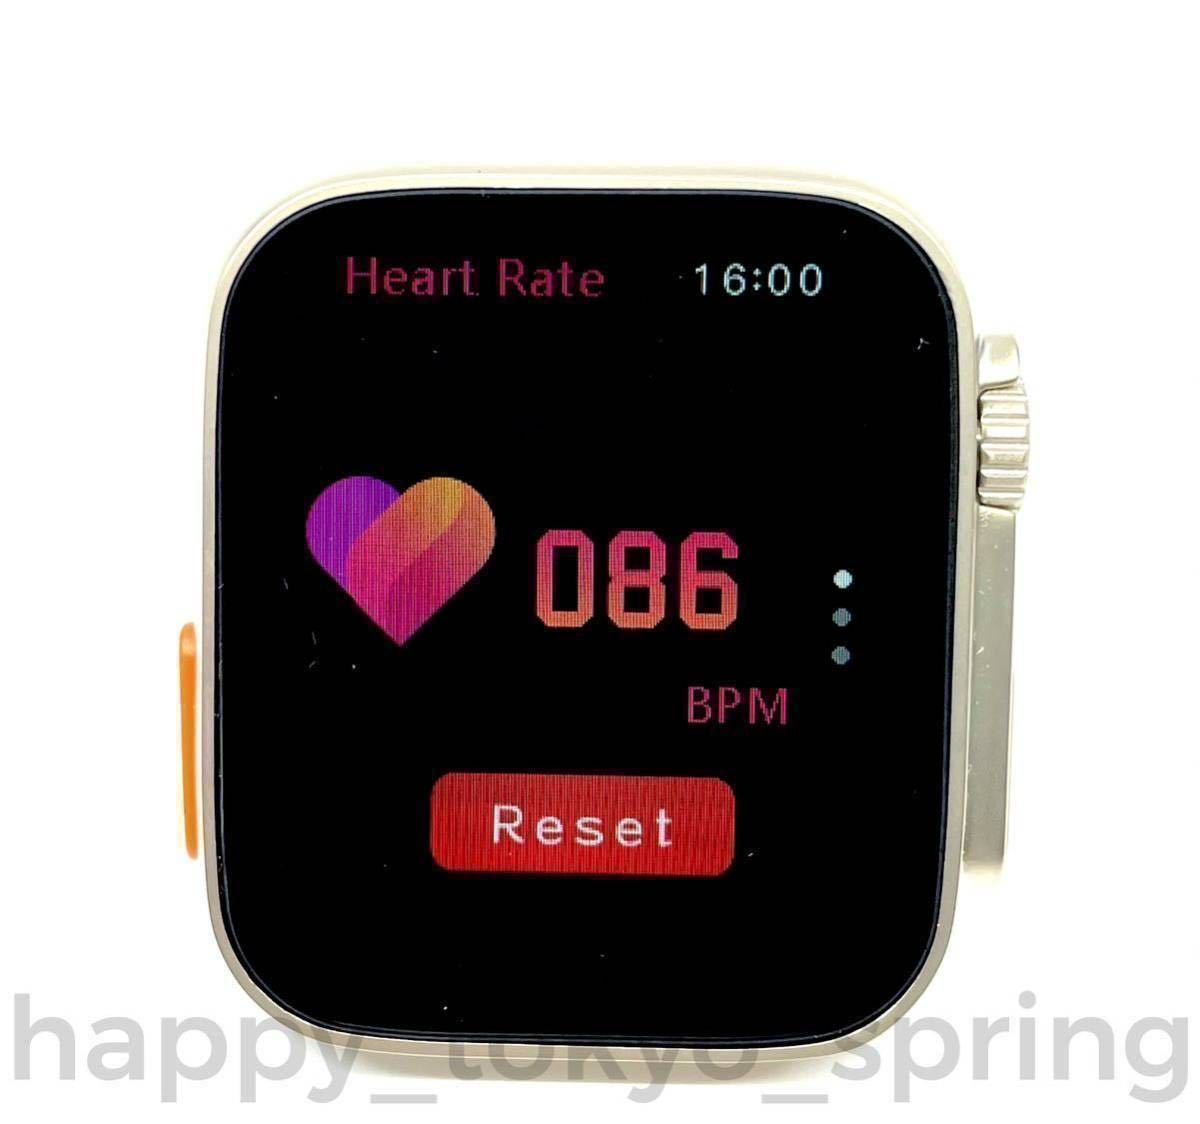  new goods Apple Watch substitute 2.19 -inch large screen S9 Ultra smart watch telephone call music multifunction health sport waterproof . middle oxygen android blood pressure 